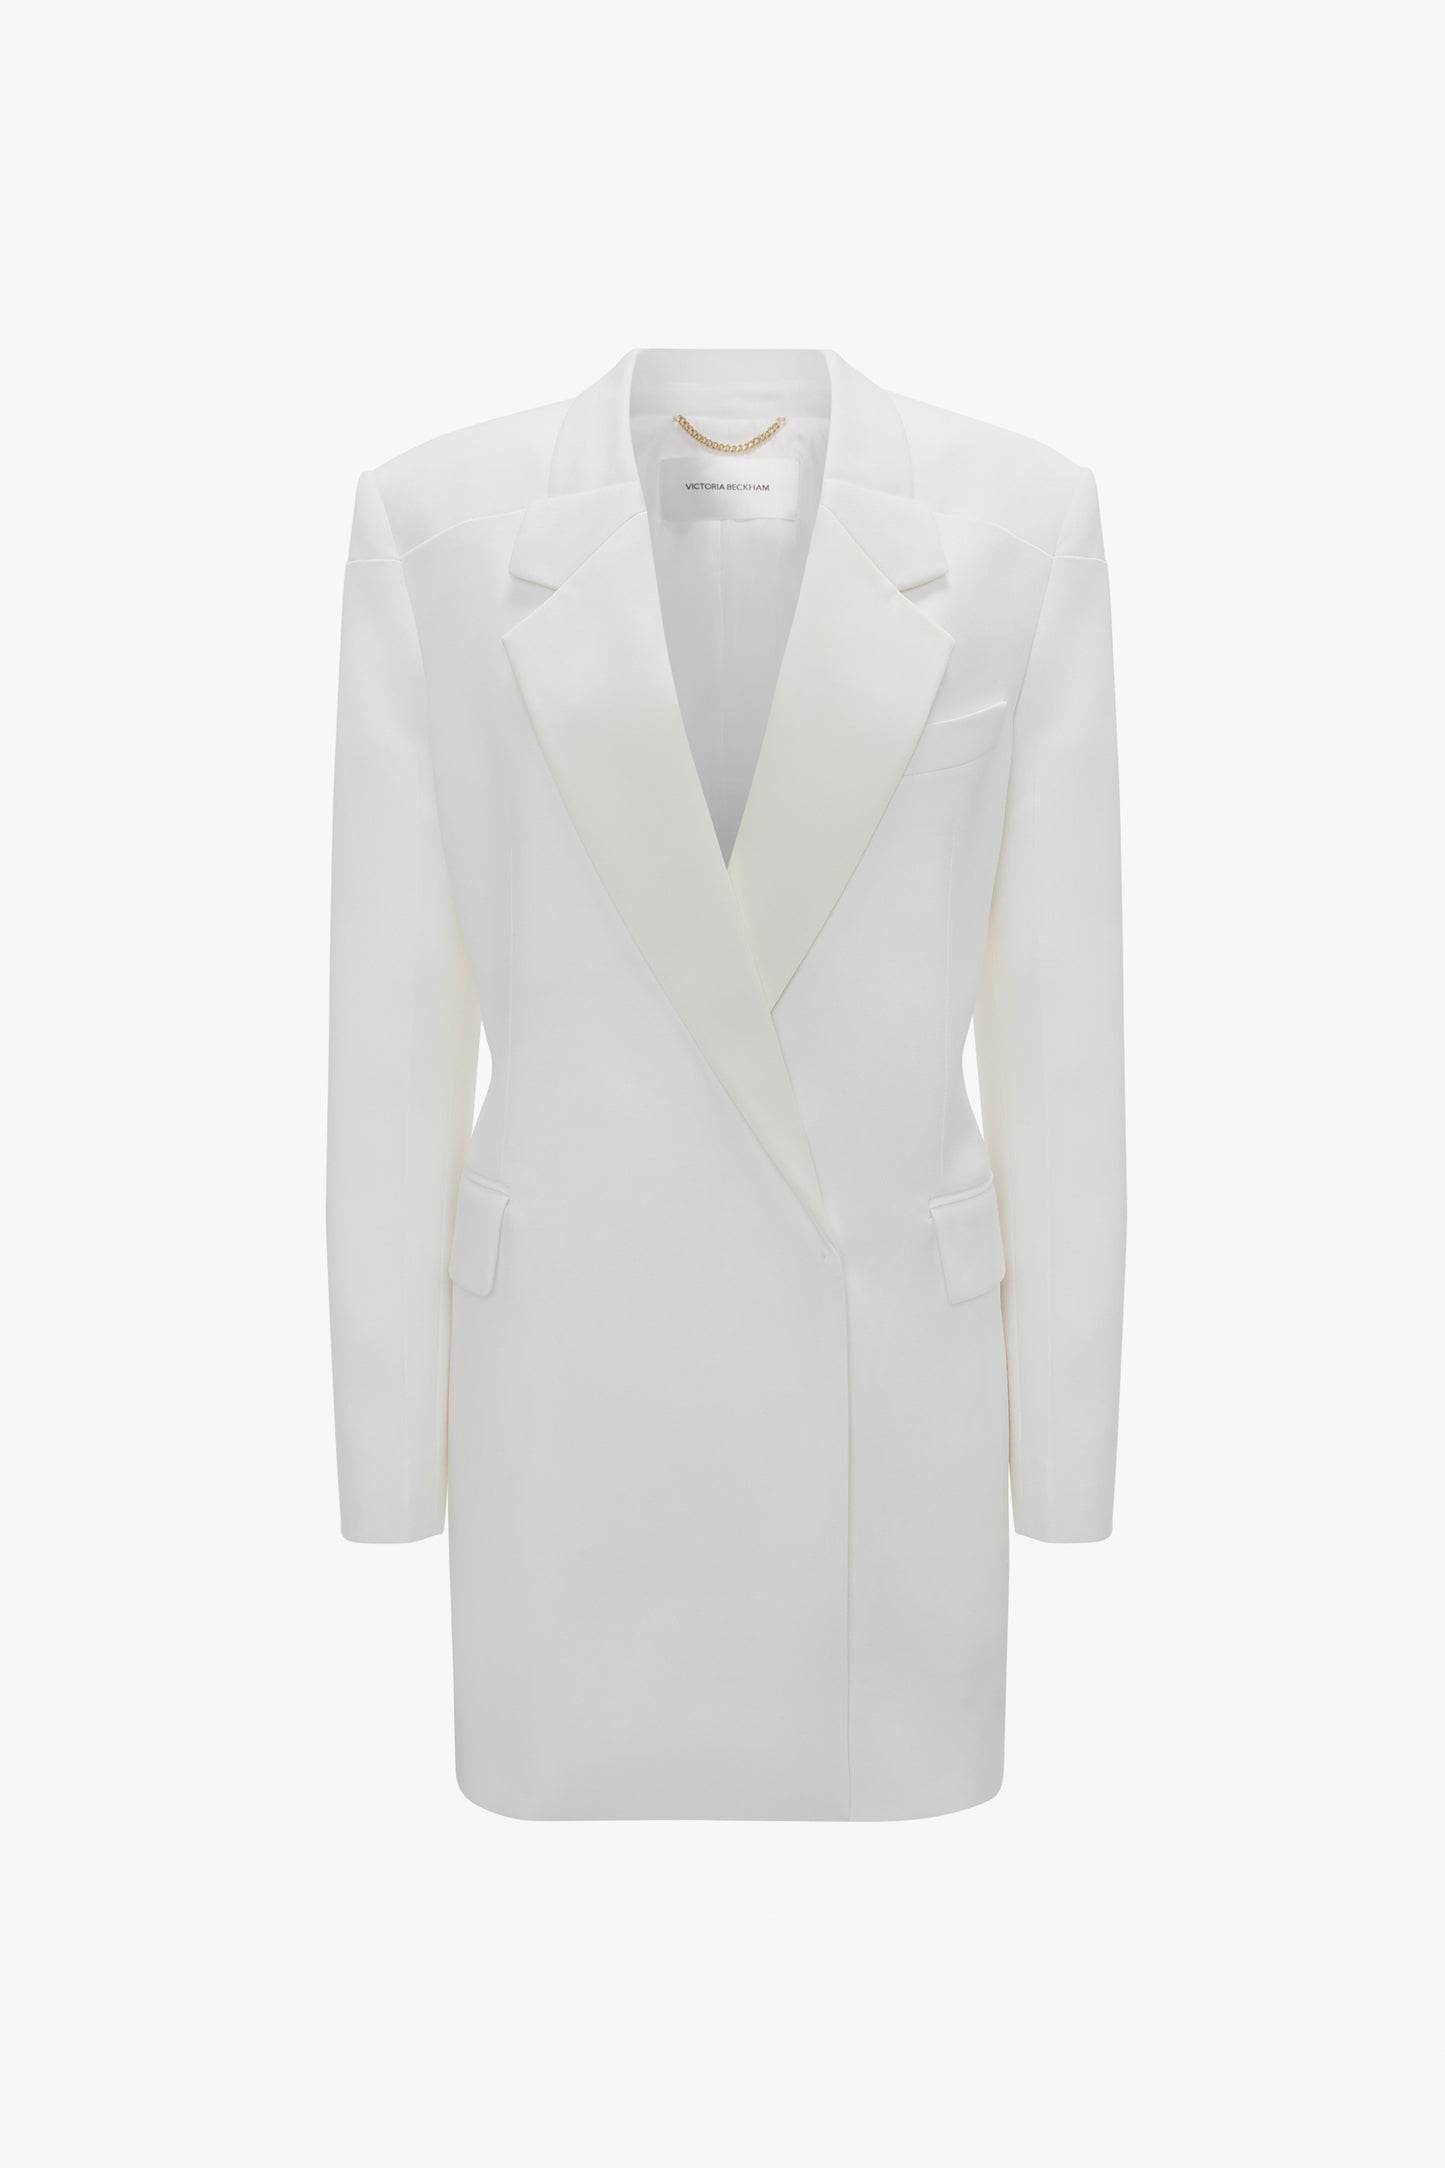 A Victoria Beckham Exclusive Fold Shoulder Detail Dress In Ivory with sharp lapels and a double-breasted cut, showcased against a plain background.